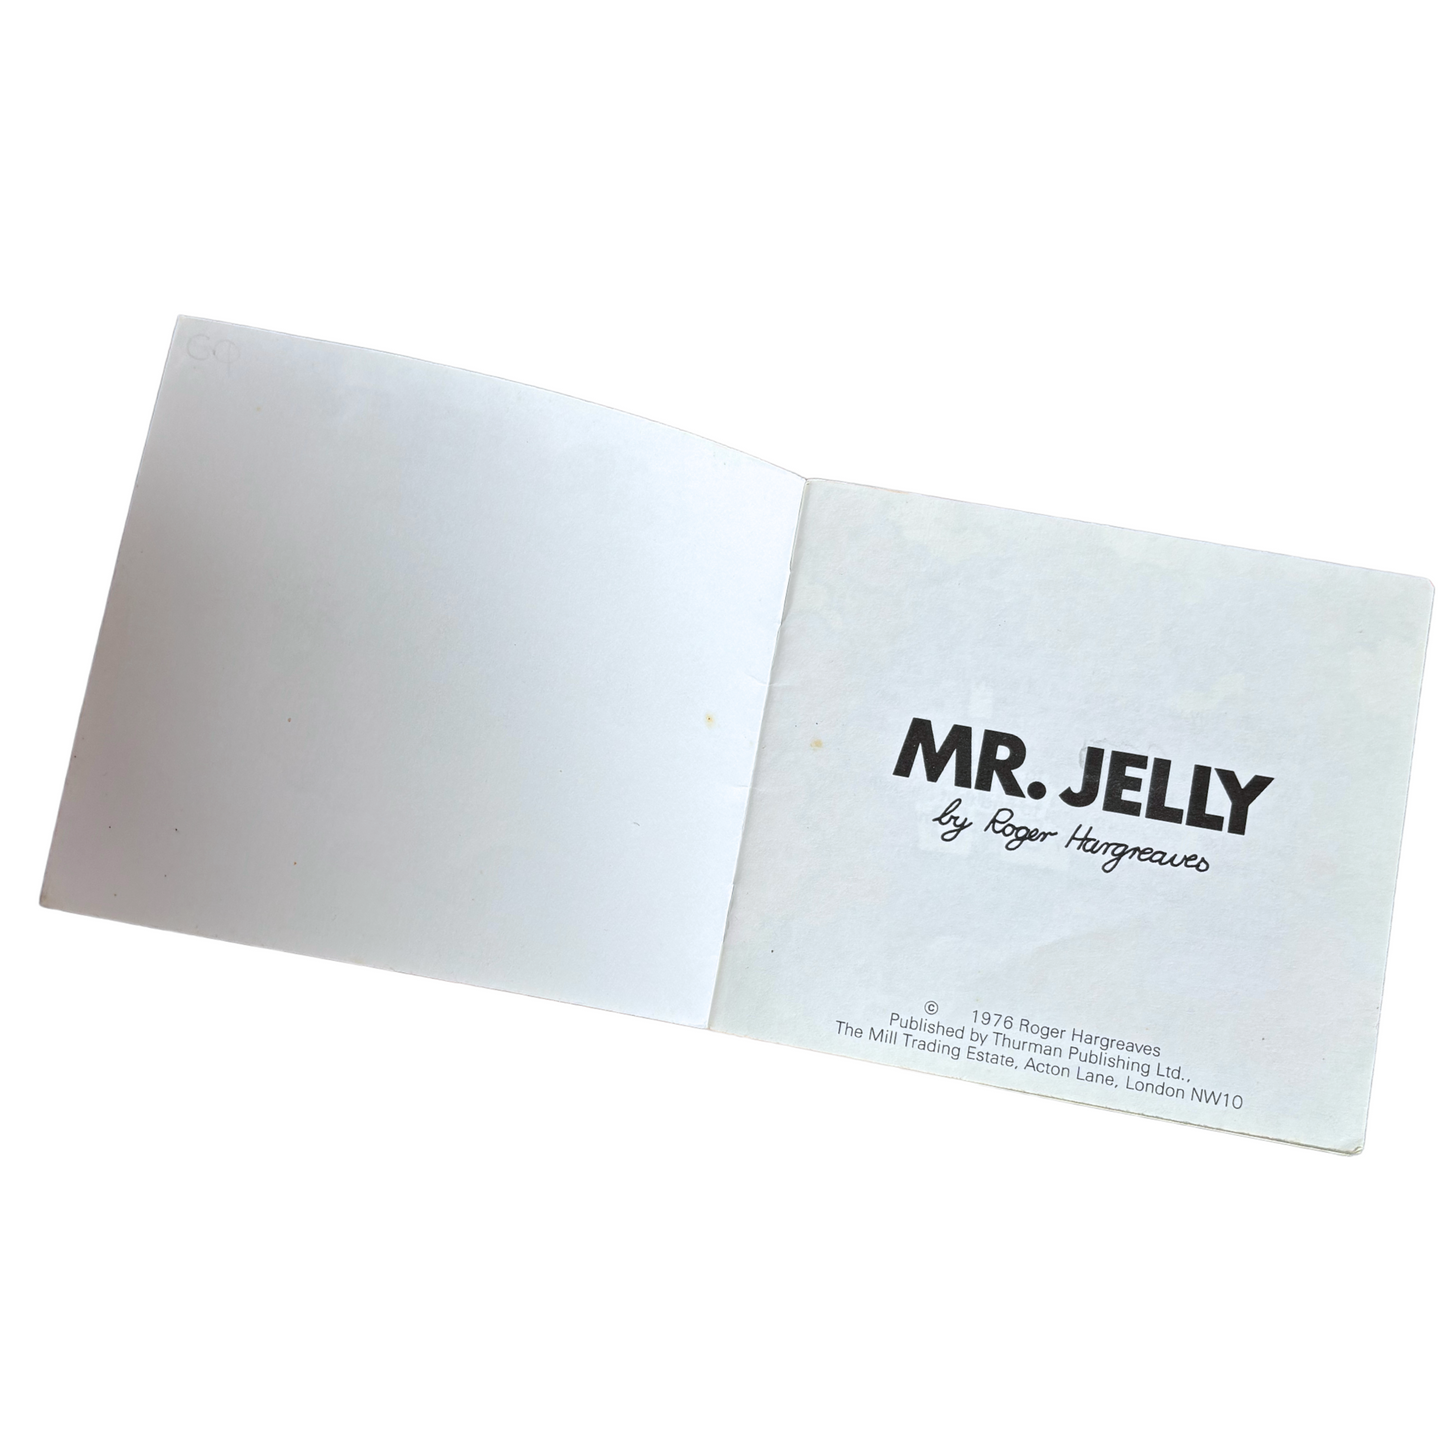 Original 1970s Mr Men Book, Mr Jelly by Roger Hargreaves. 1976. Great gift idea